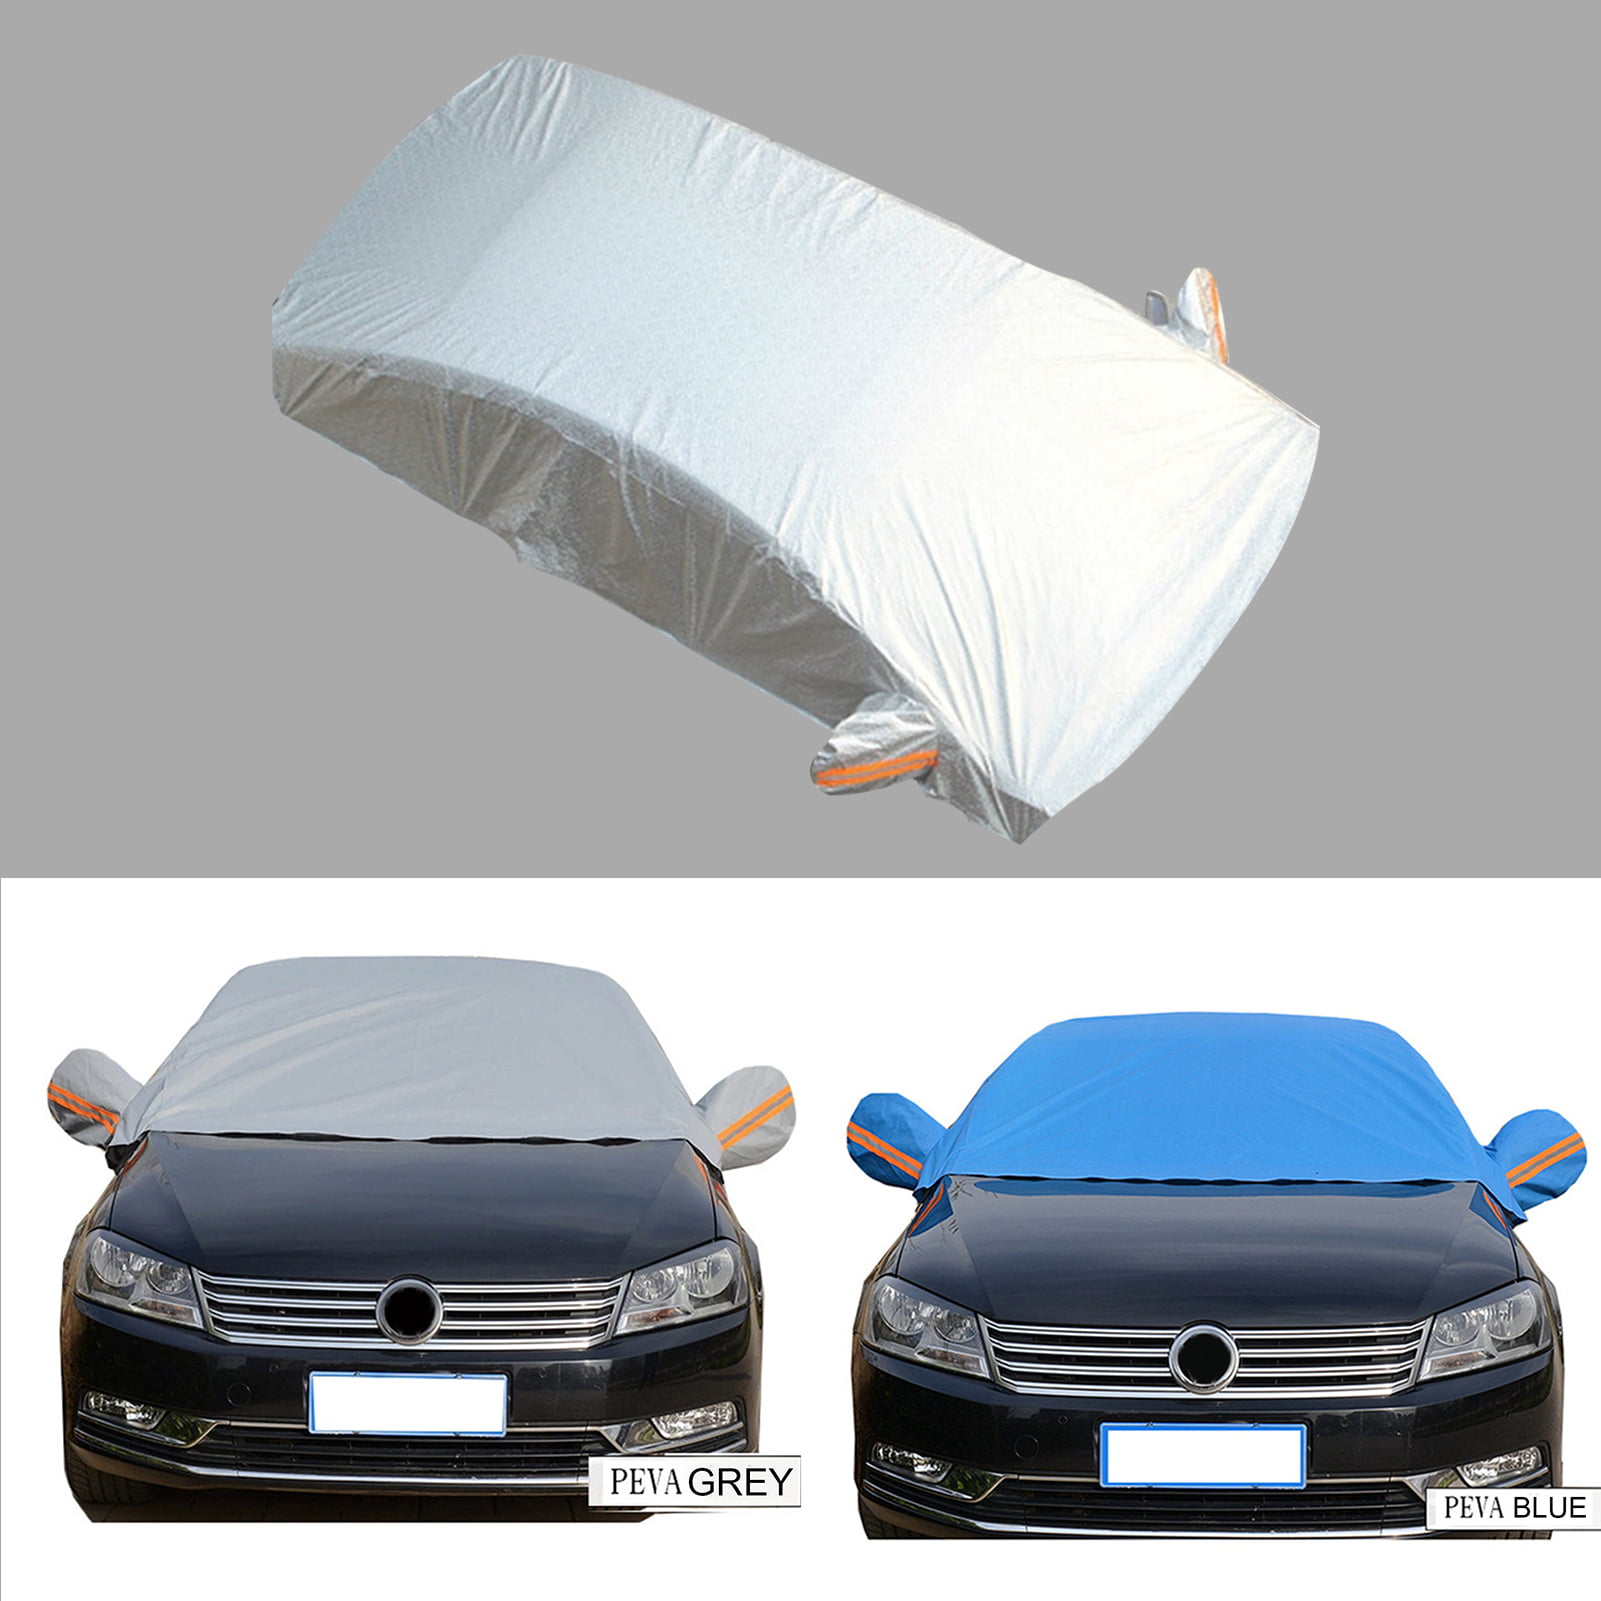 Volkswagen Passat Car Cover, Tailor Made for Your Vehicle and Fast  Shipping, VW Passat Logo Car Full Cover for All Models, Car Protector 